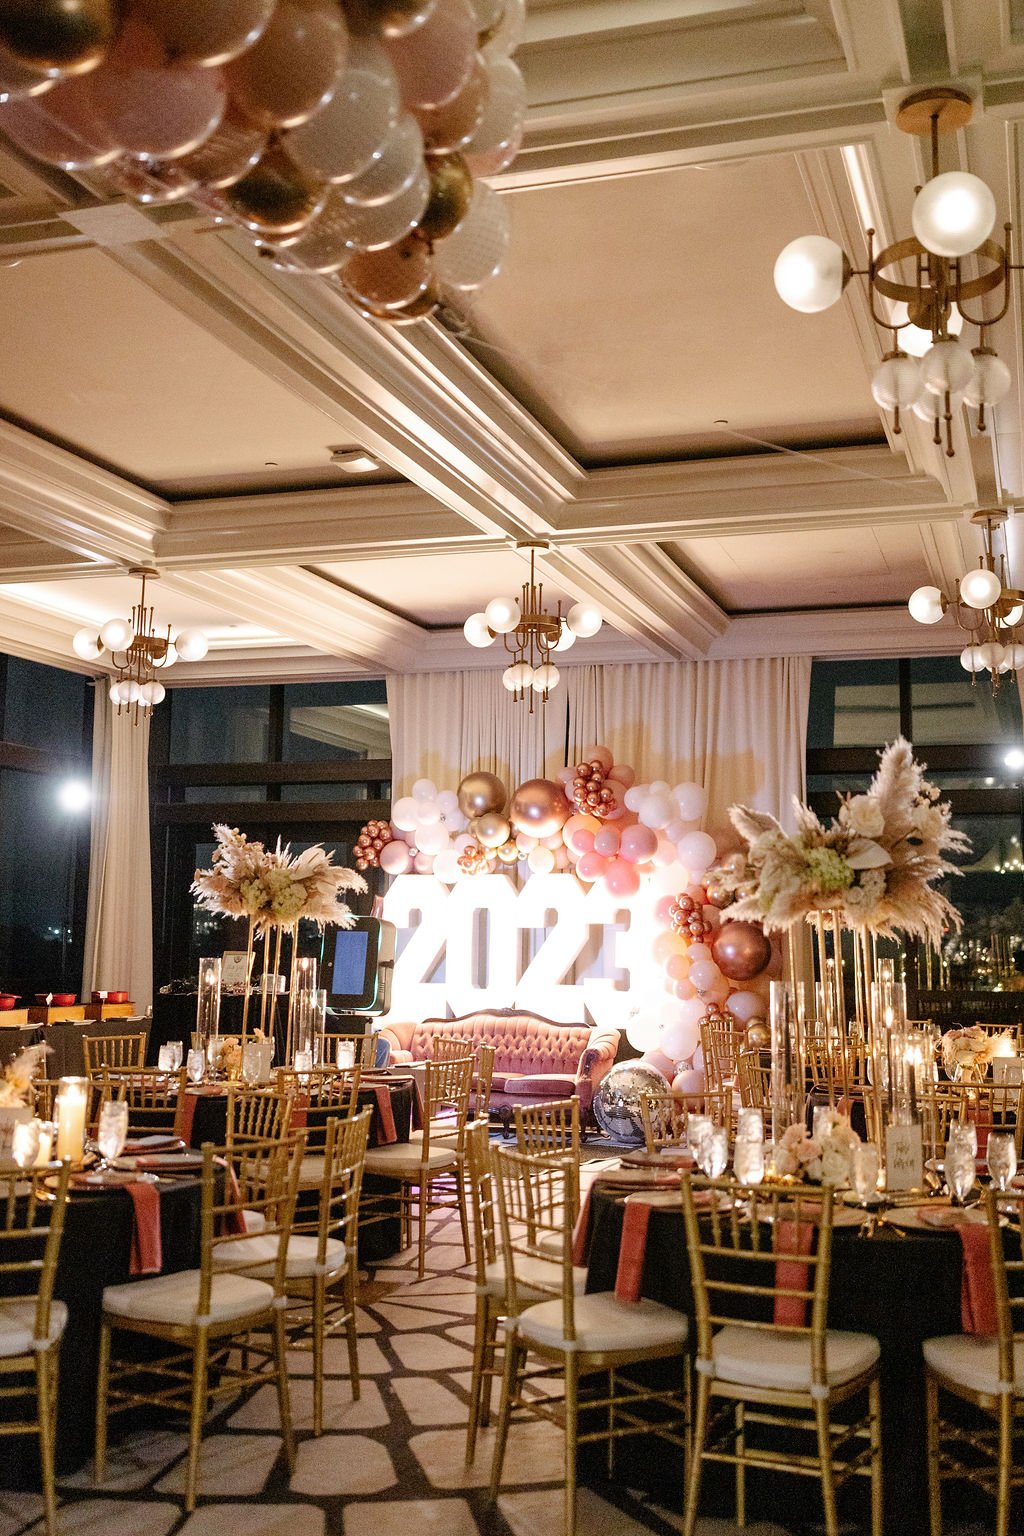 katie-and-zacks-boho-chic-new-years-eve-wedding-in-savannah-georgia-at-the-georgia-state-railroad-museum-and-the-perry-lane-hotel-featuring-wedding-florals-by-savannah-florist-ivory-and-beau-savannah-wedding-savannah-wedding-florist-36.jpg